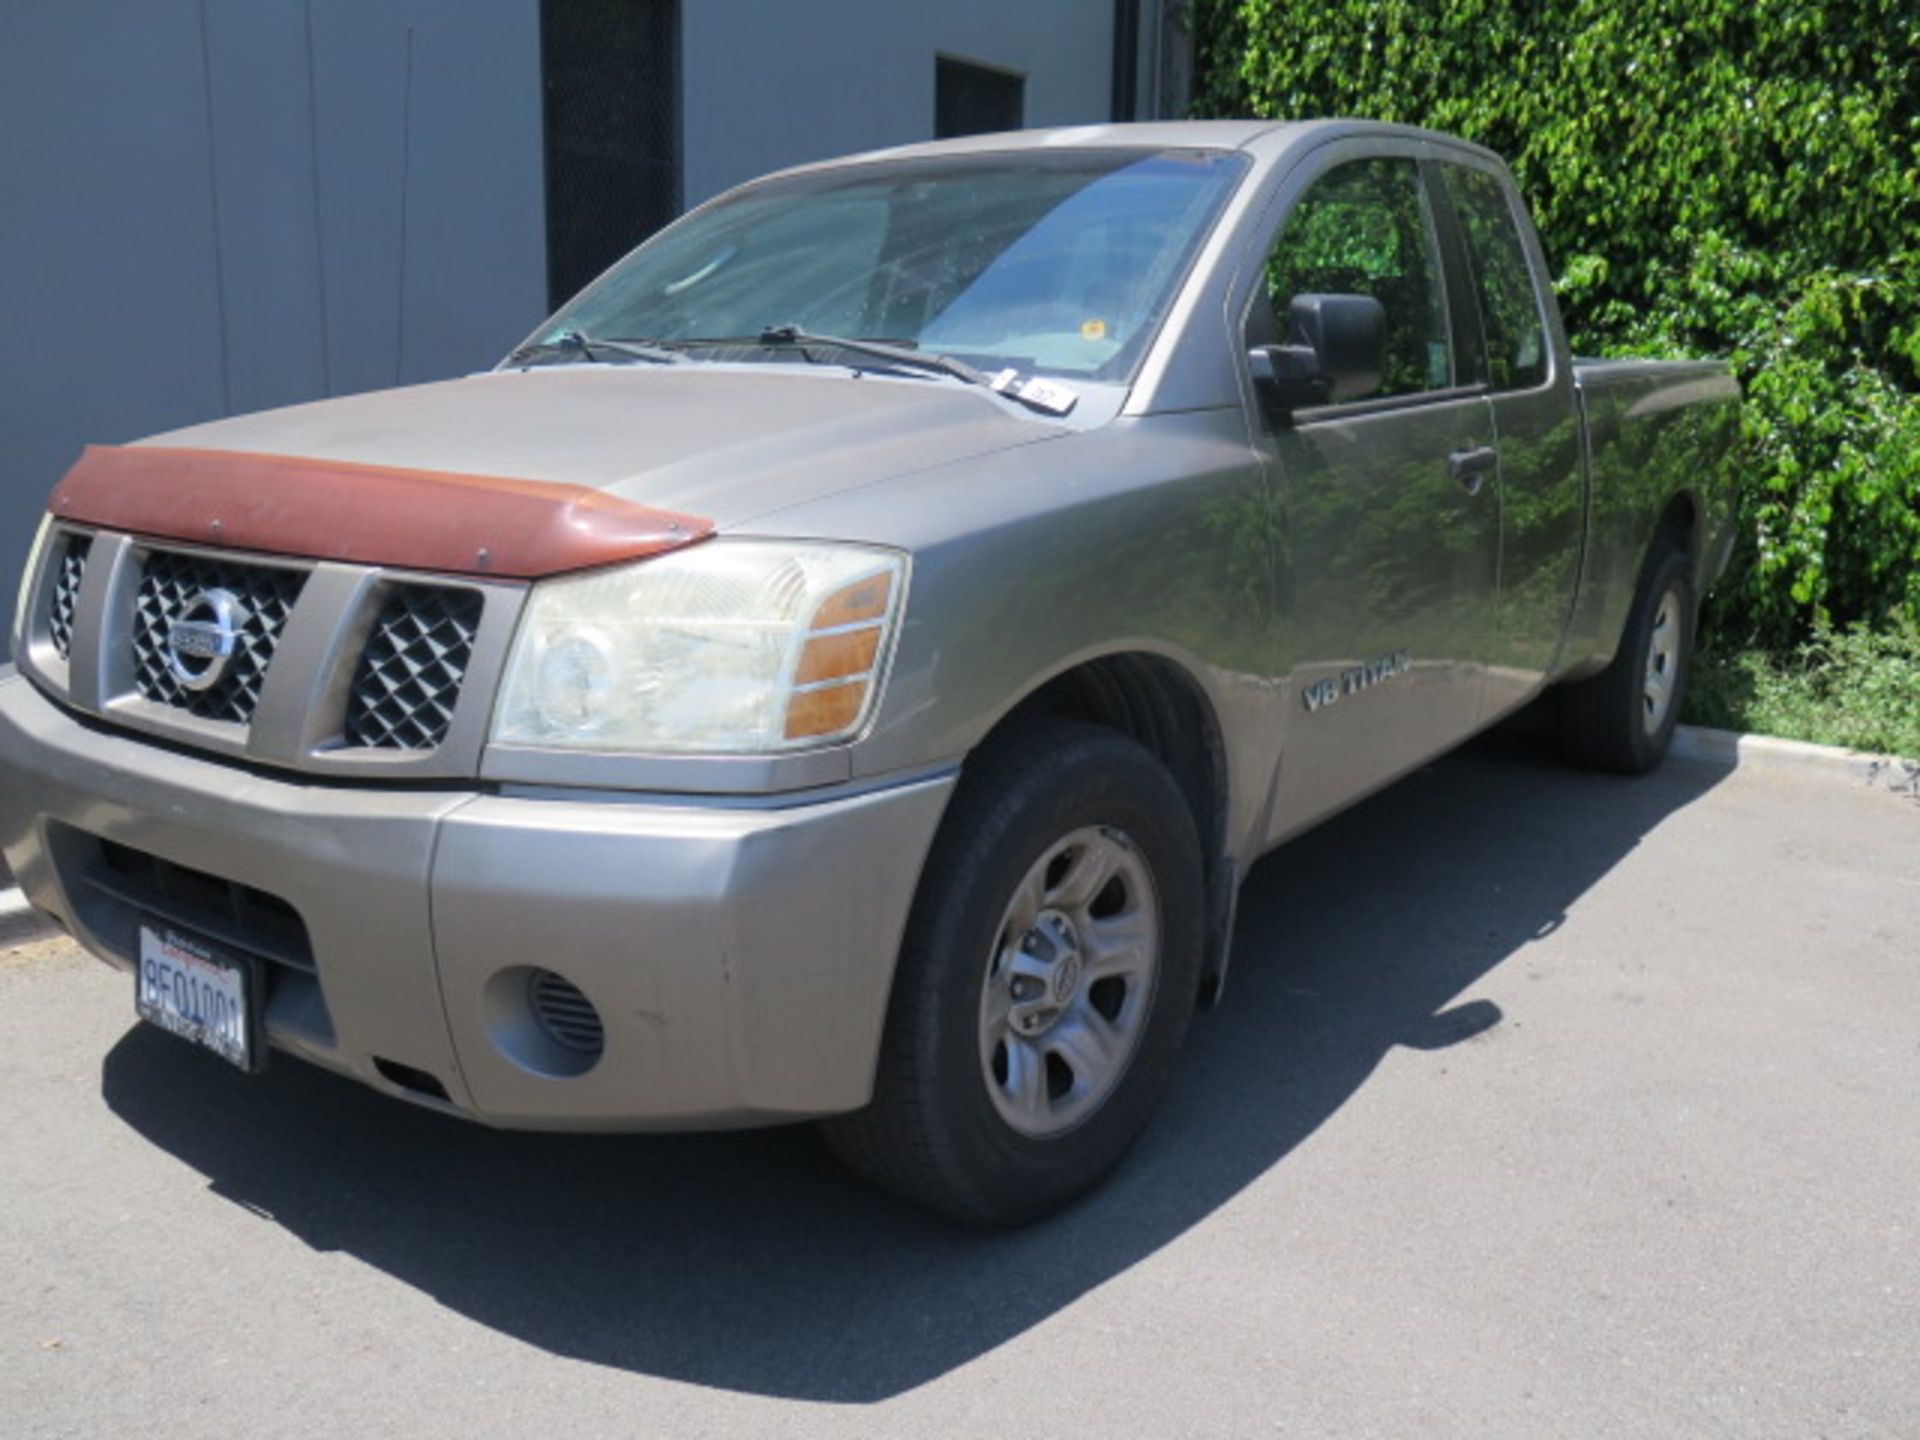 2006 Nissan Titan Extended Cab Pickup Truck w/ 5.6L V-8 Gas Engine, Automatic Trans, AC, AM/FM/CD, - Image 2 of 13